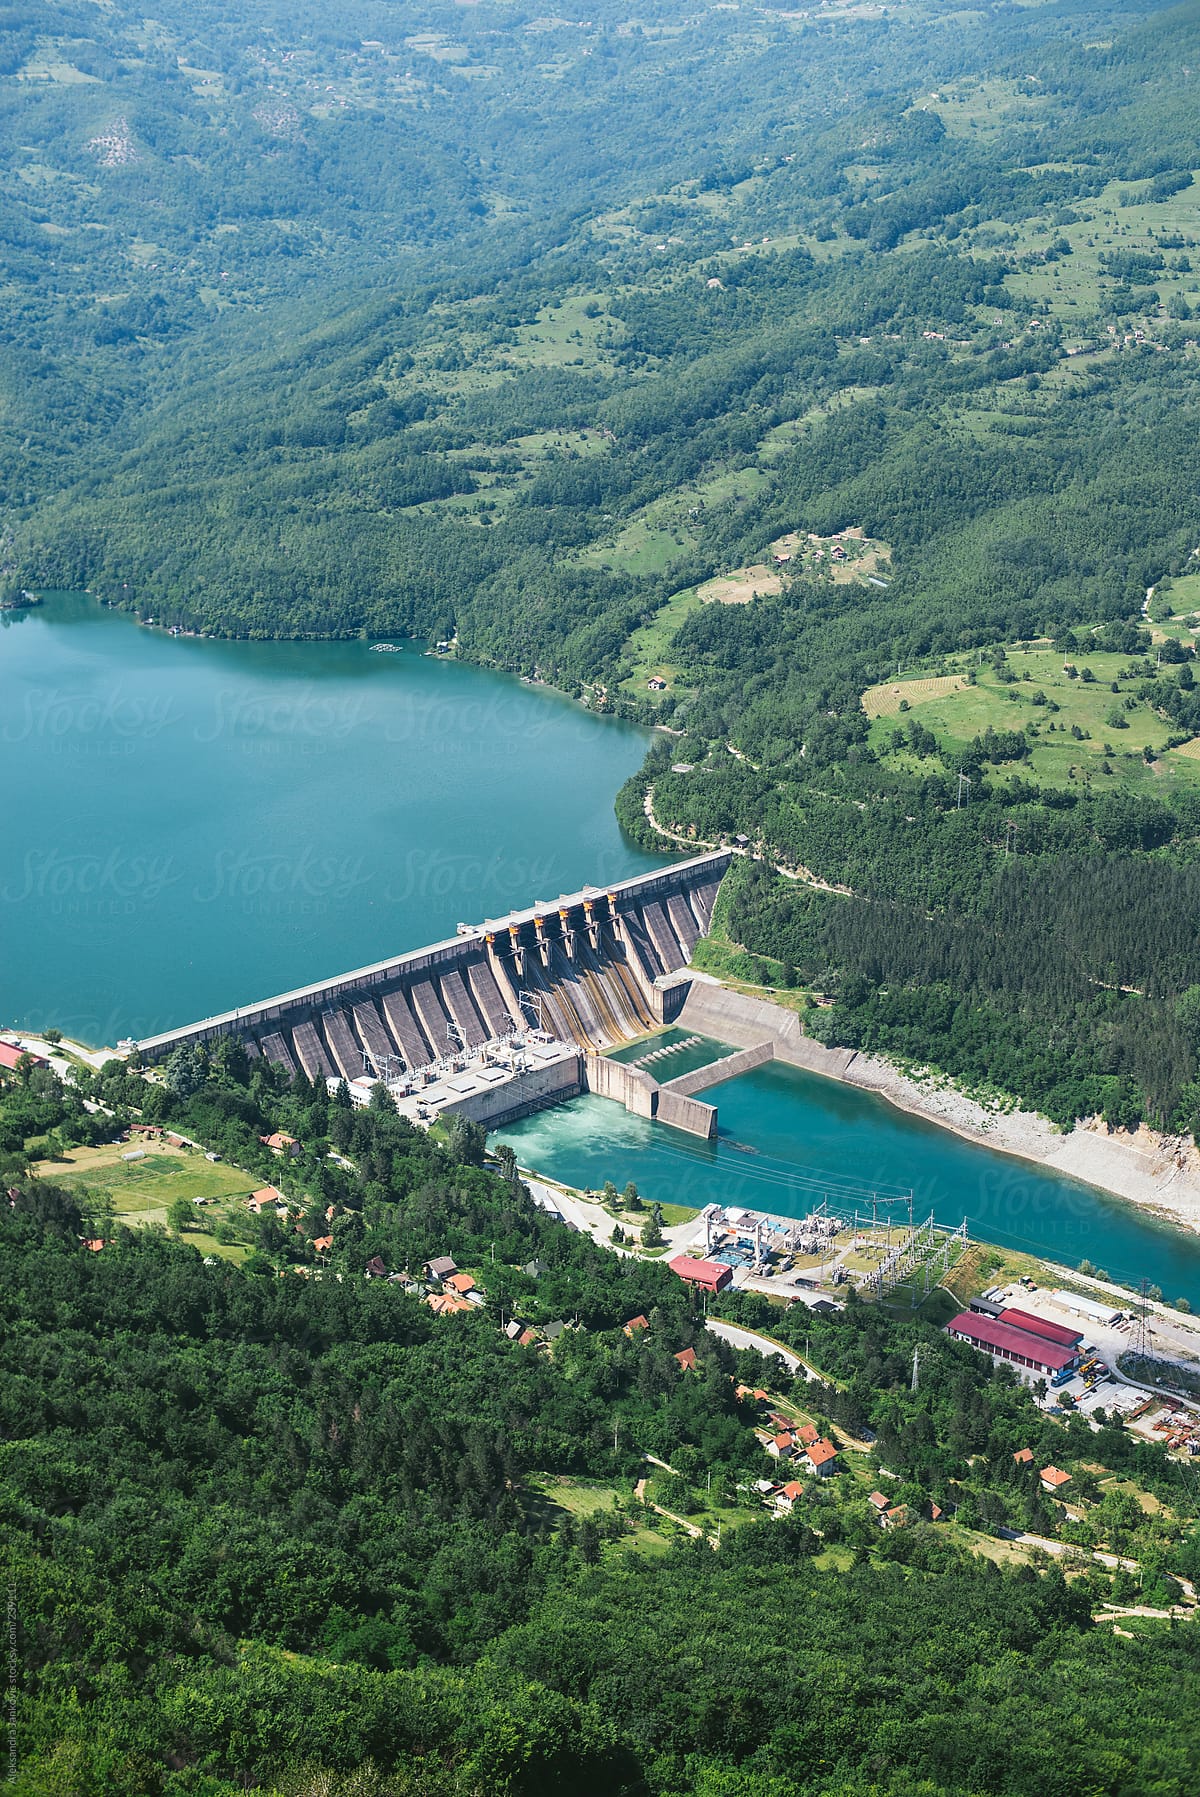 Hydroelectric power plant and dam on the river